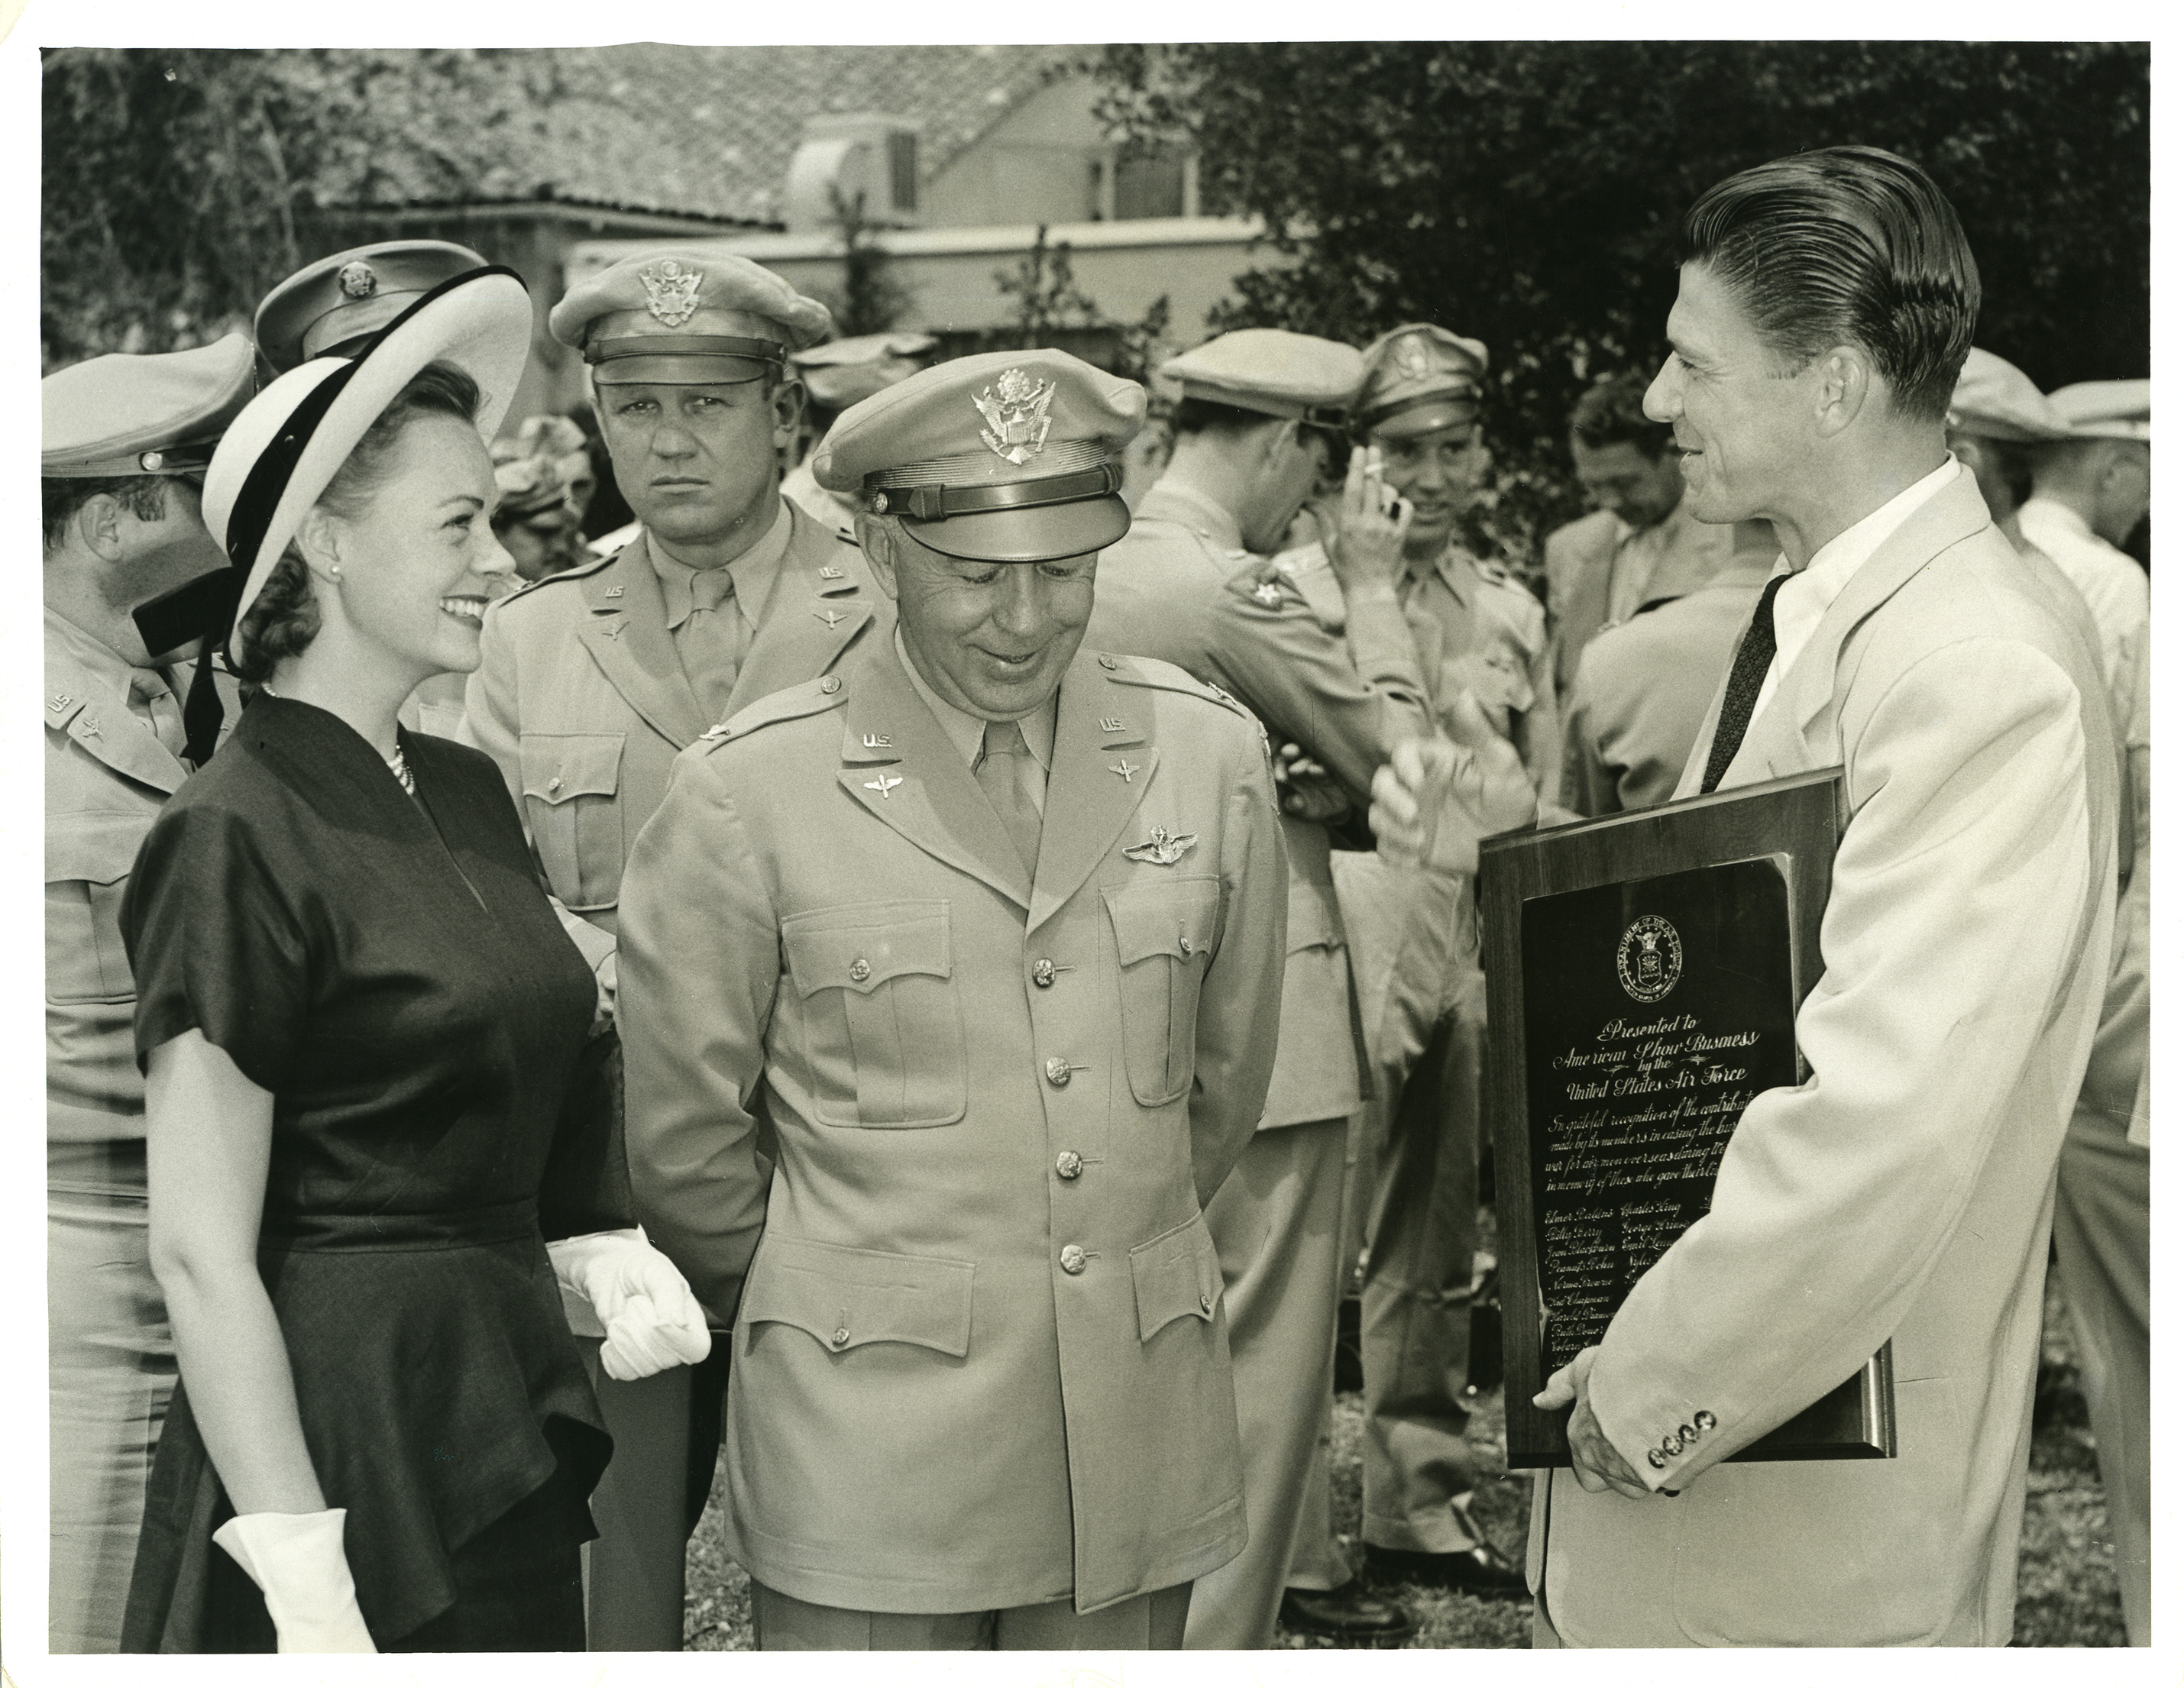 Ronald Reagan, June Lockhart, Col. Davidson (Reagan holding plaque inscribed “Presented to the American Show Business by the U.S. Air Force”